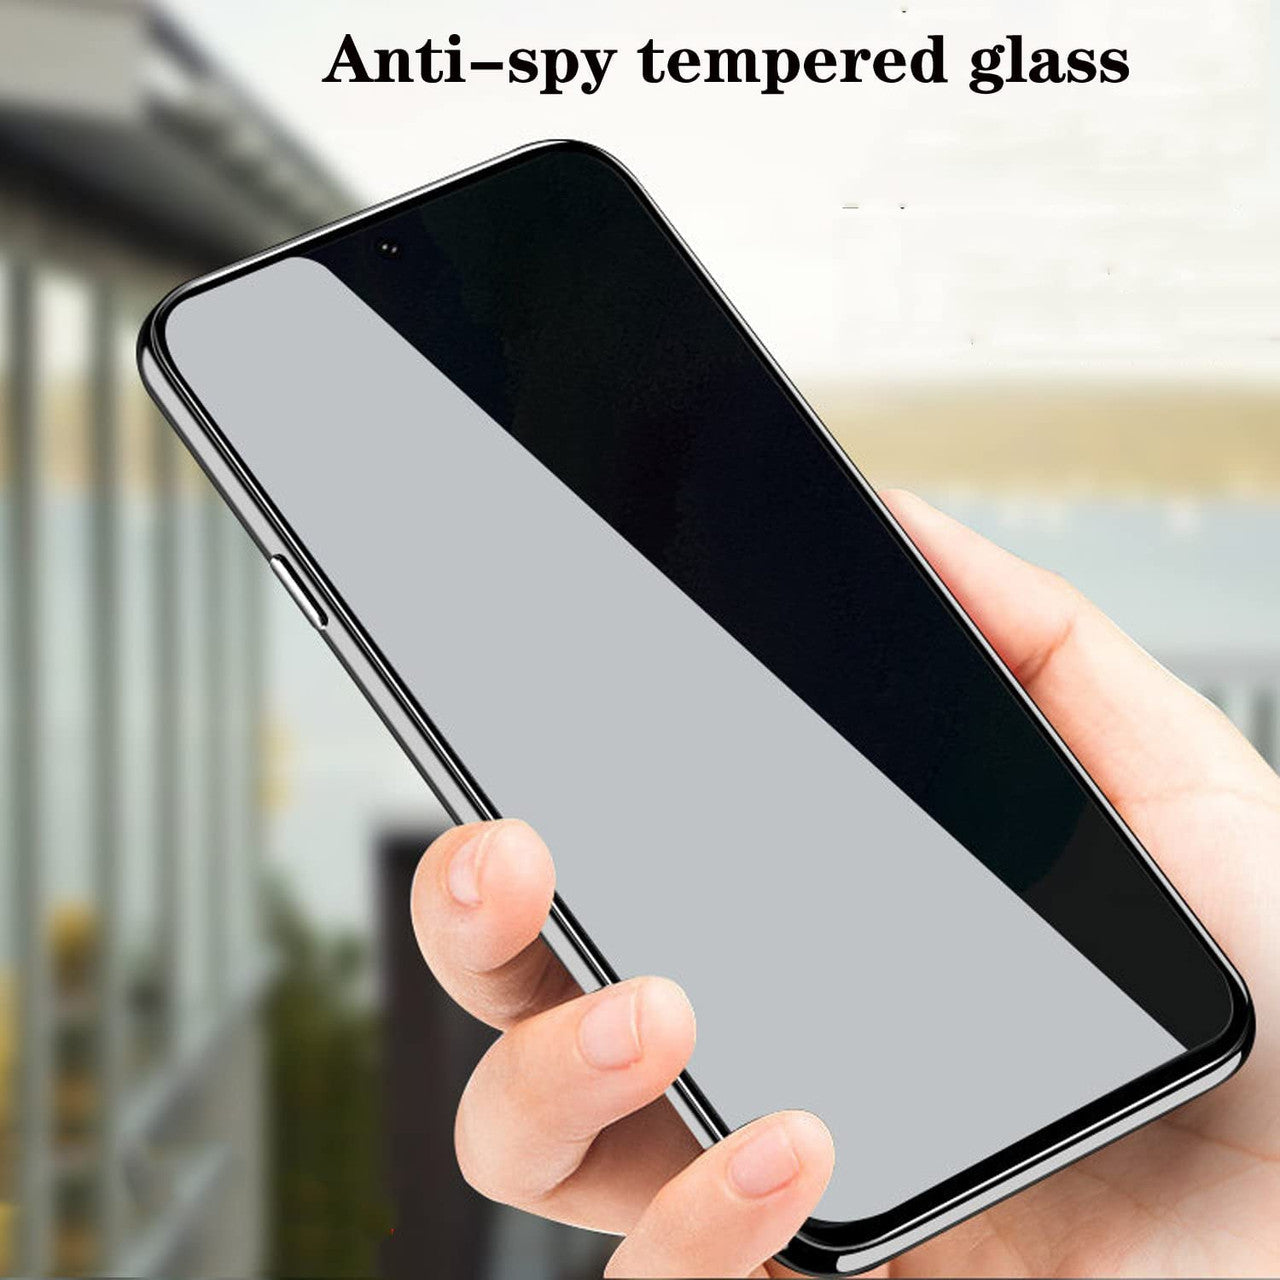  2 Pack Privacy Screen Protector   Tempered Glass   Anti-Spy   9H Hardness   Anti-Peep   3D Edge   - ON2V52 2075-6